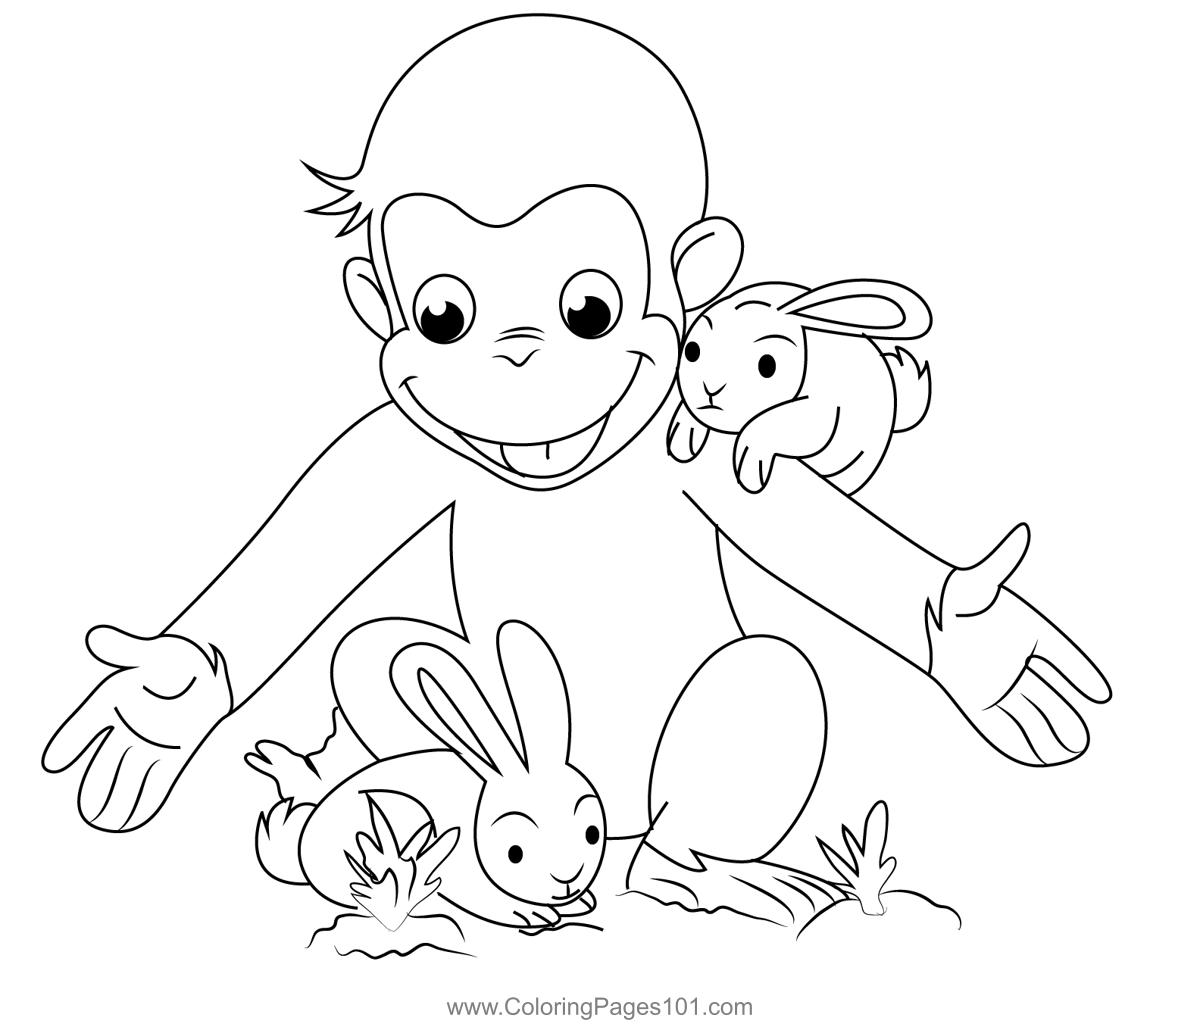 George Playing With Rabbits